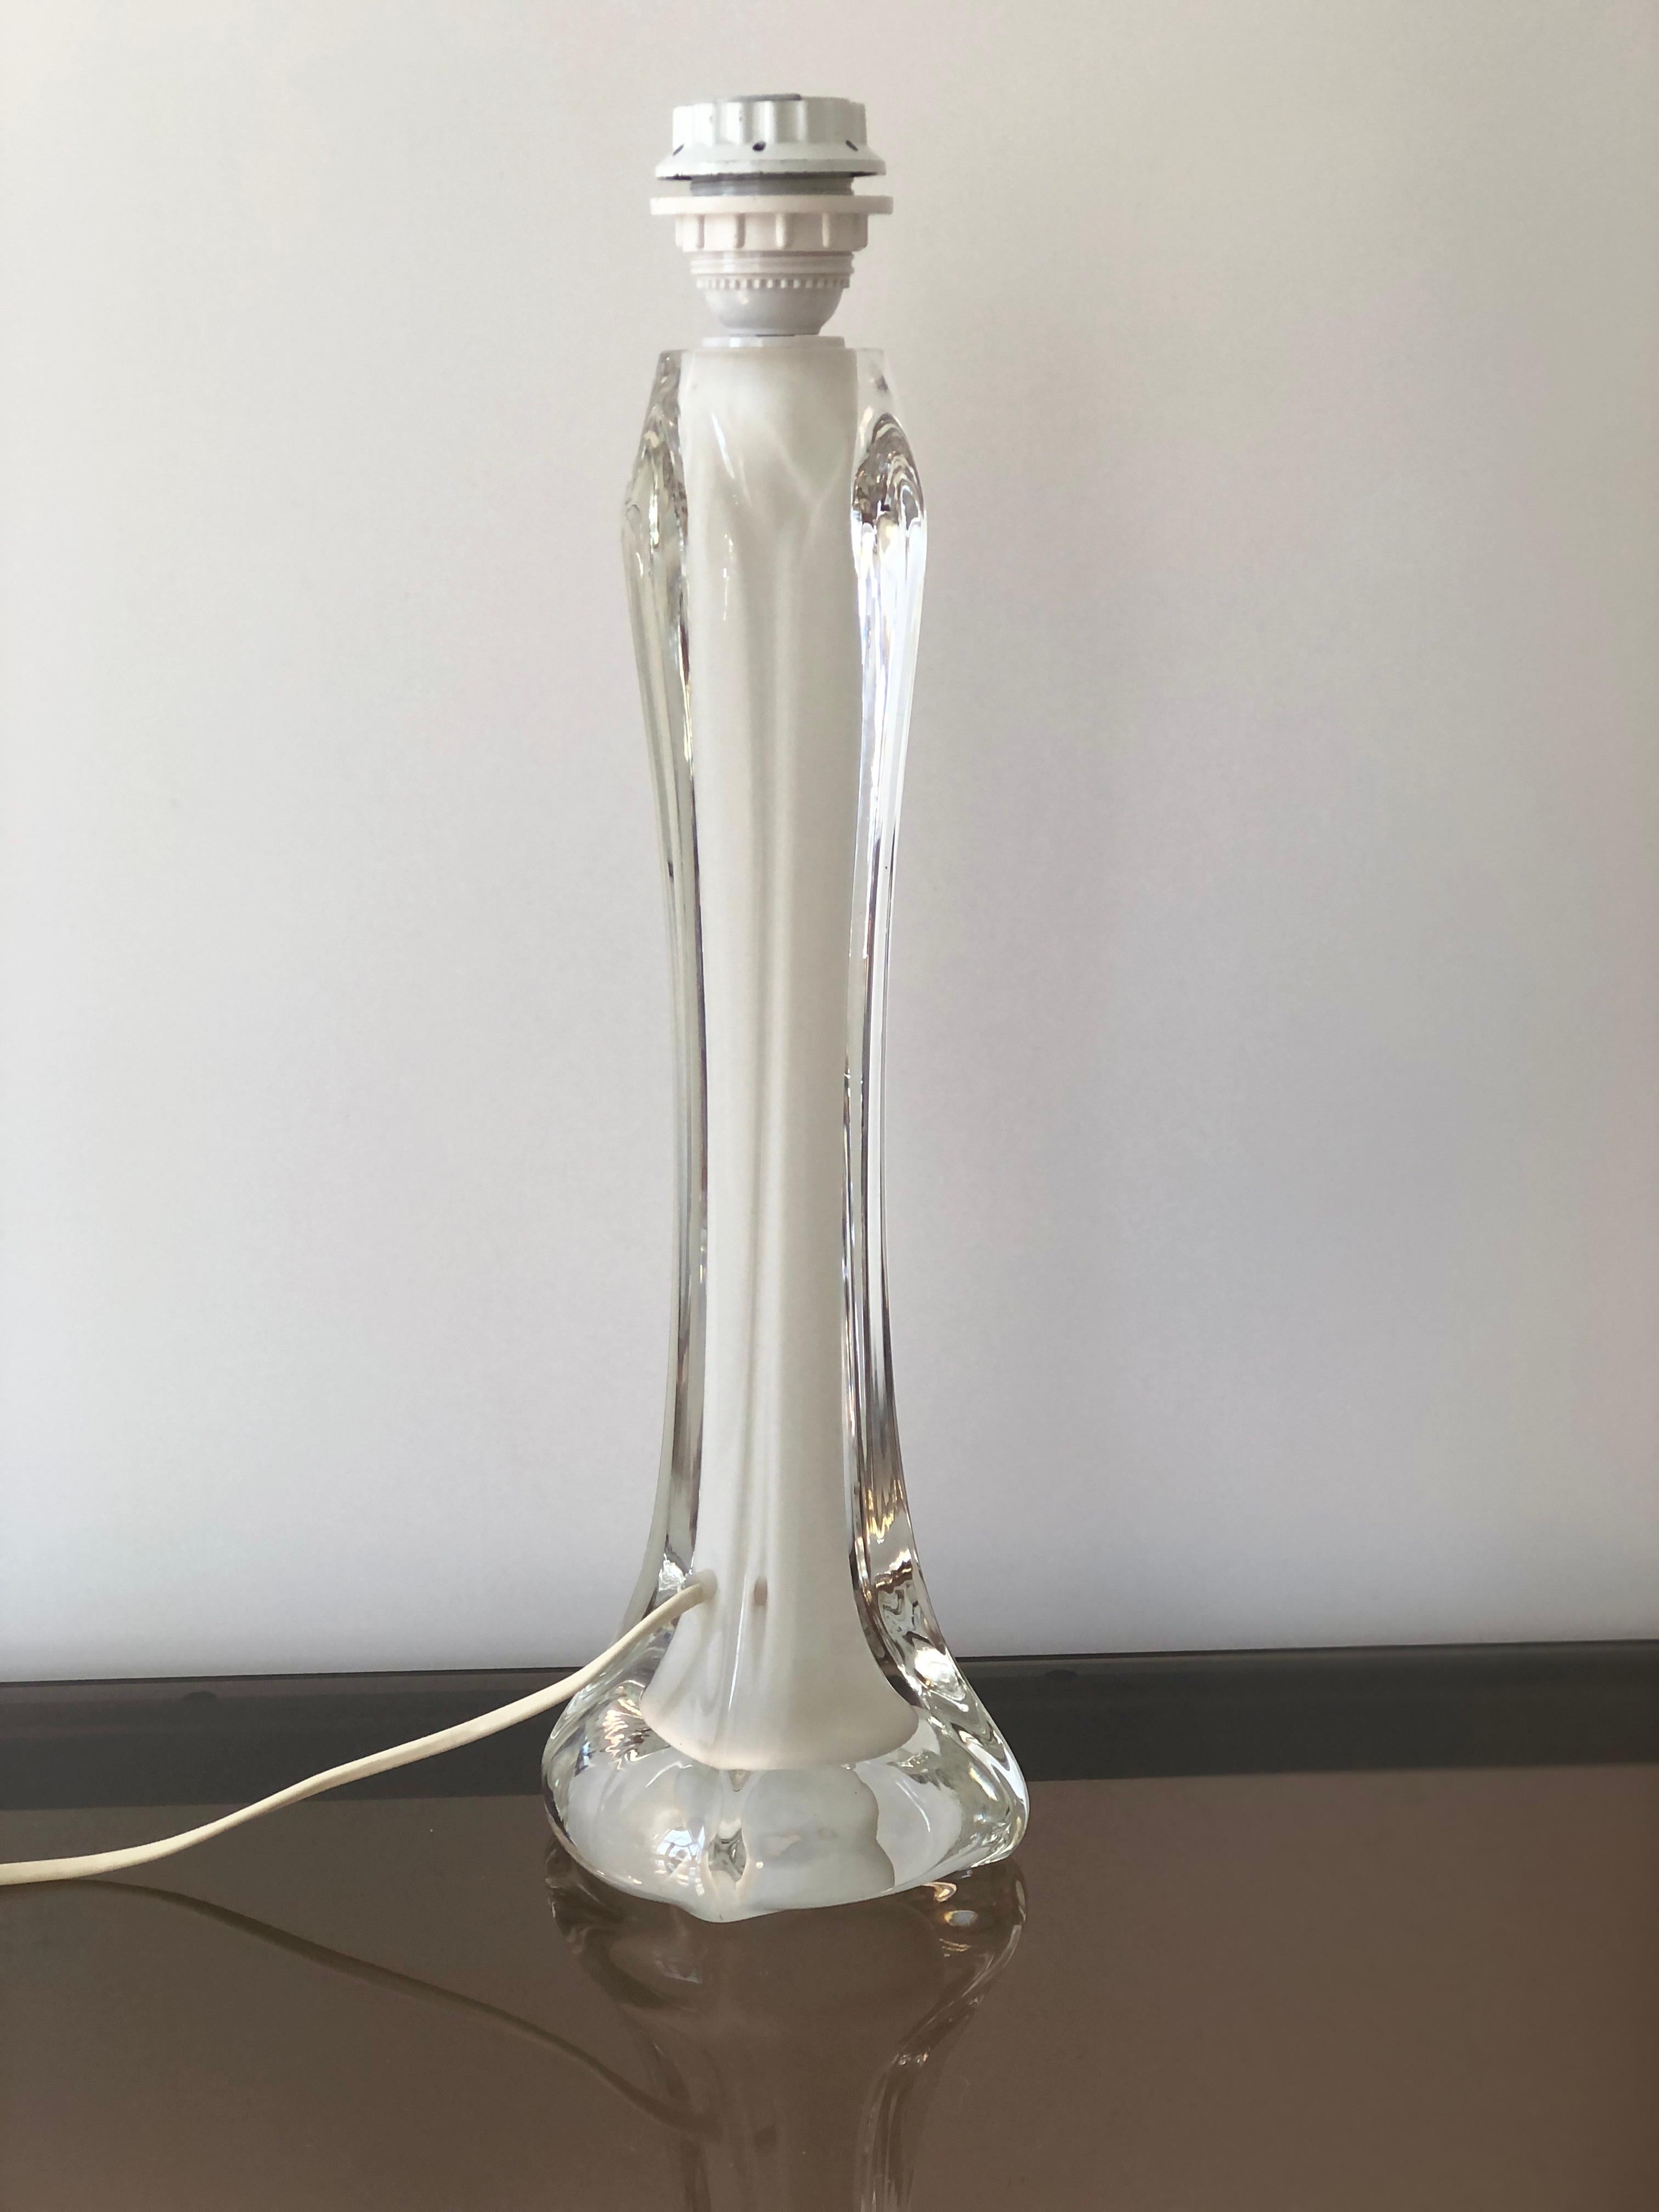 Flygsfors White Crystal Sommerso Table Lamp, 1950s In Good Condition For Sale In Tystberga, SE